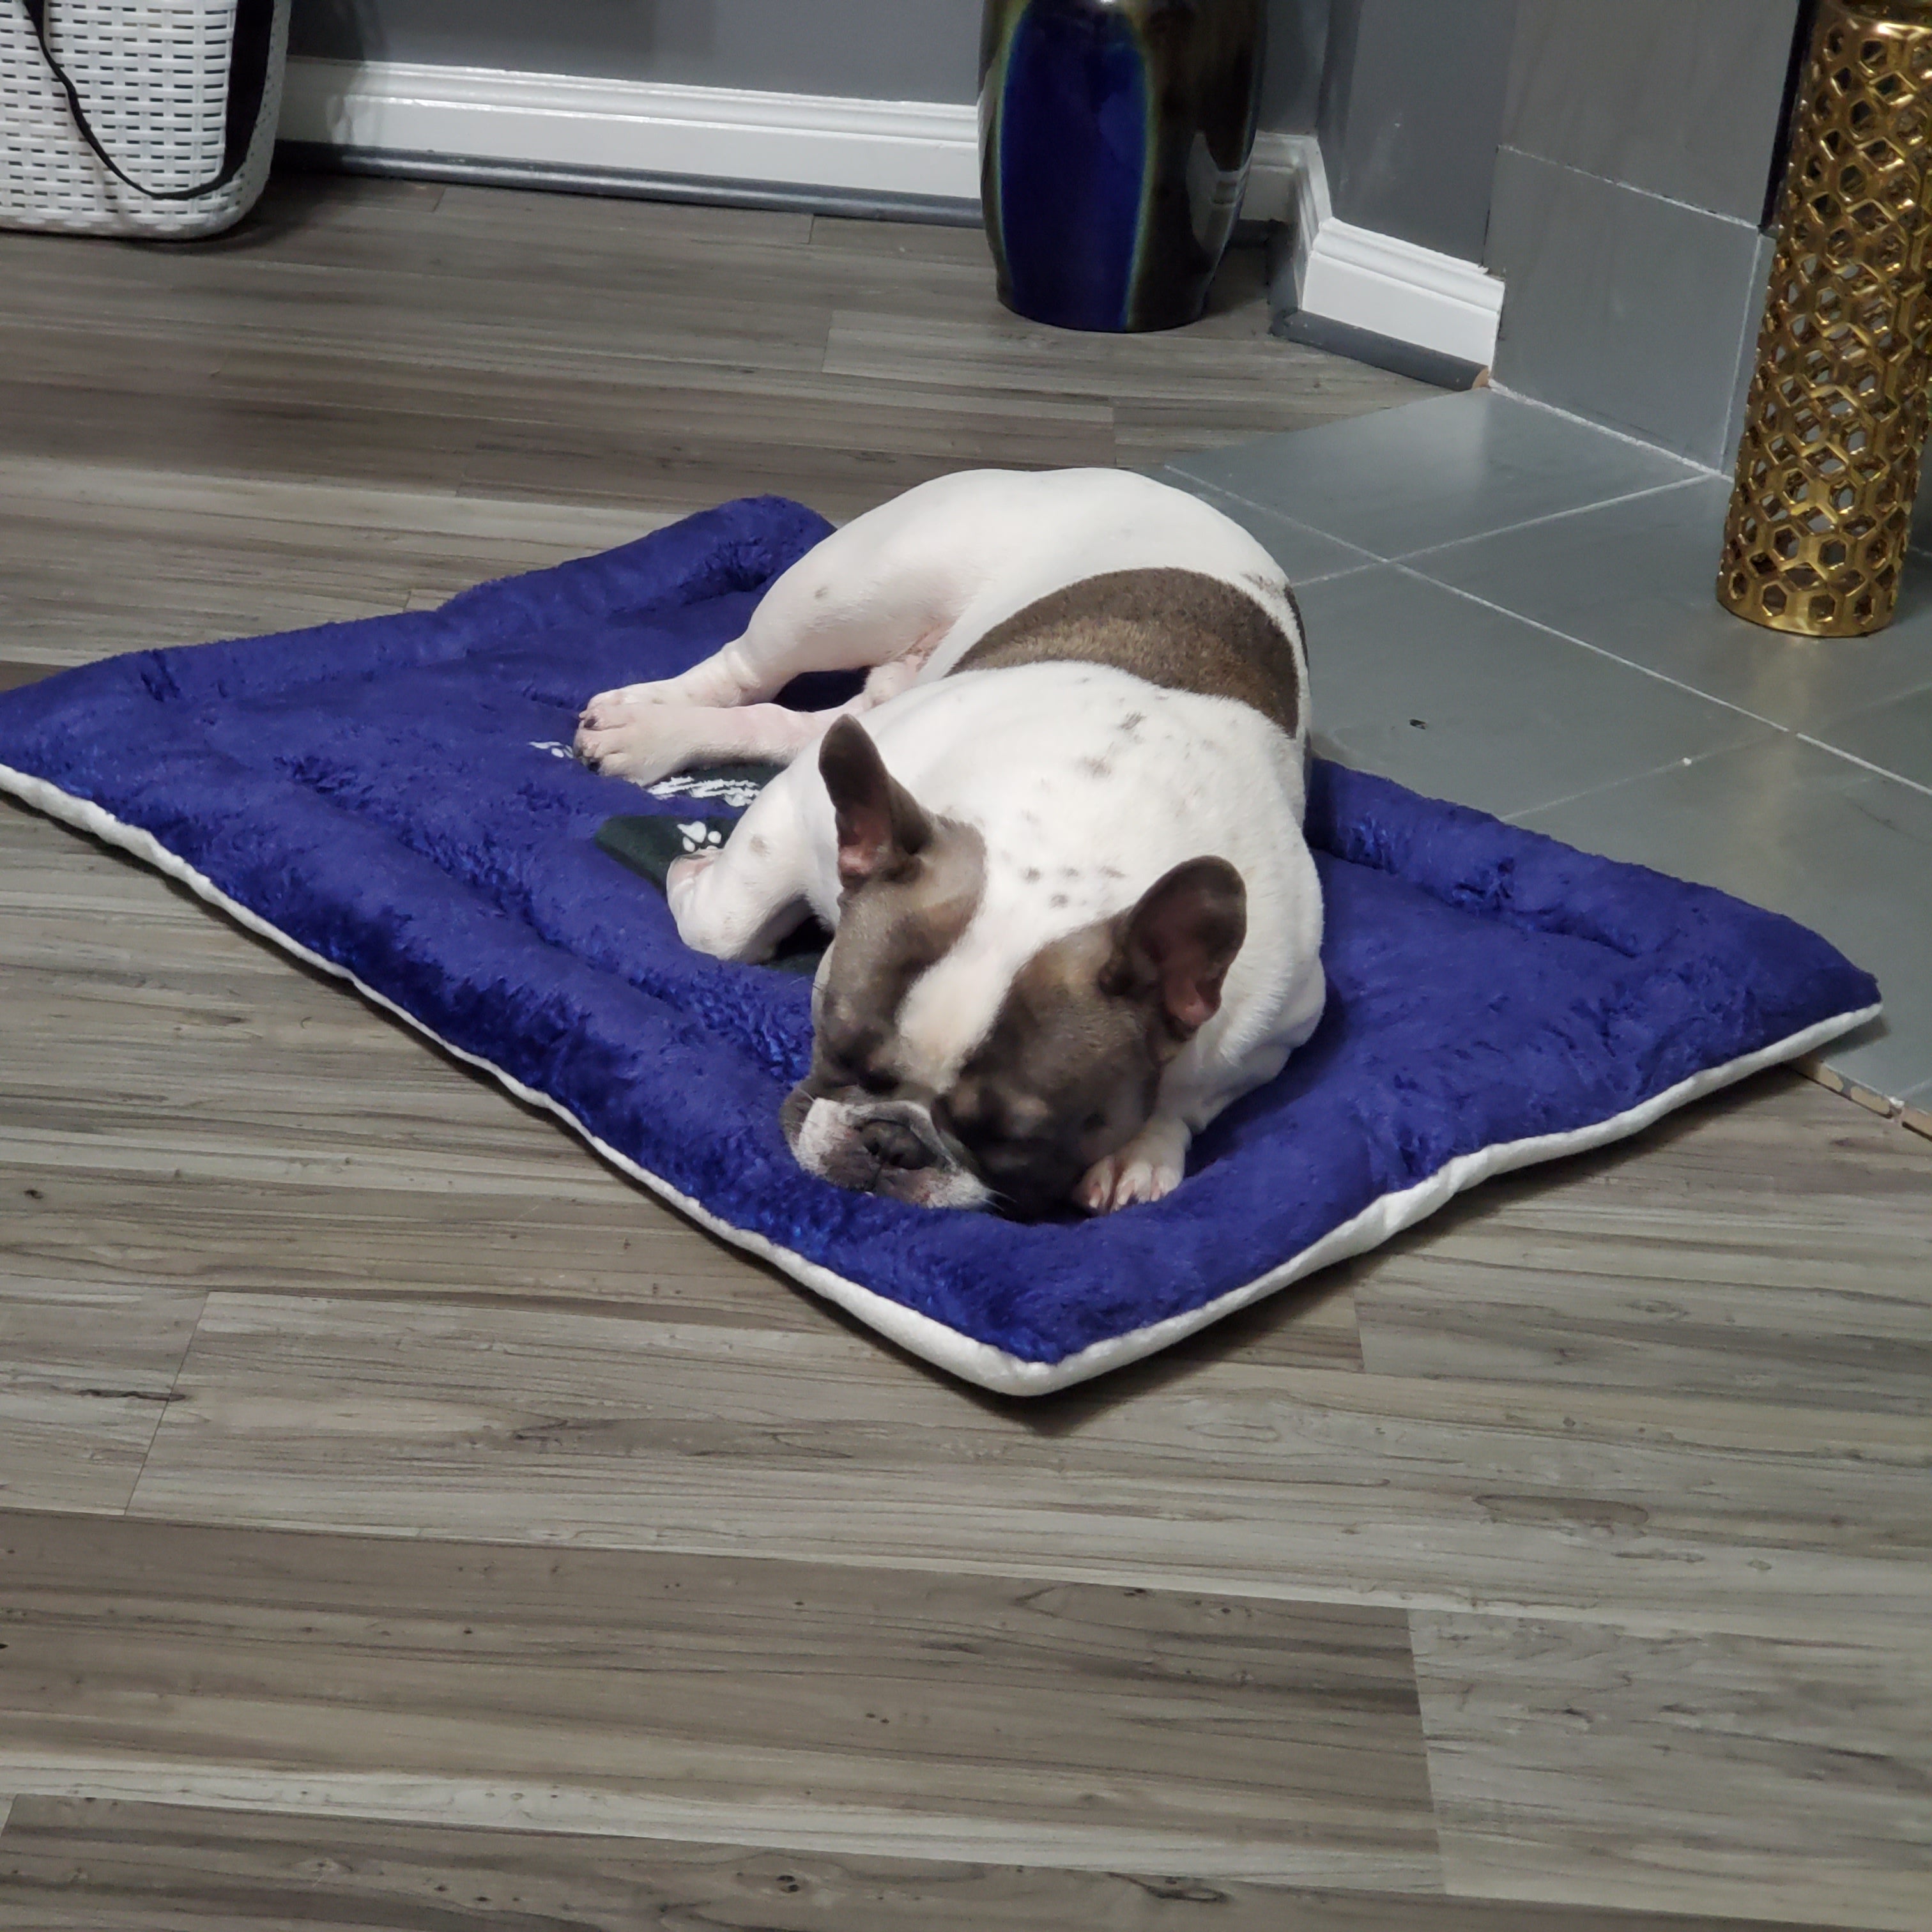 Pucci Vuitton Steps 2 Greatness Pet Bed